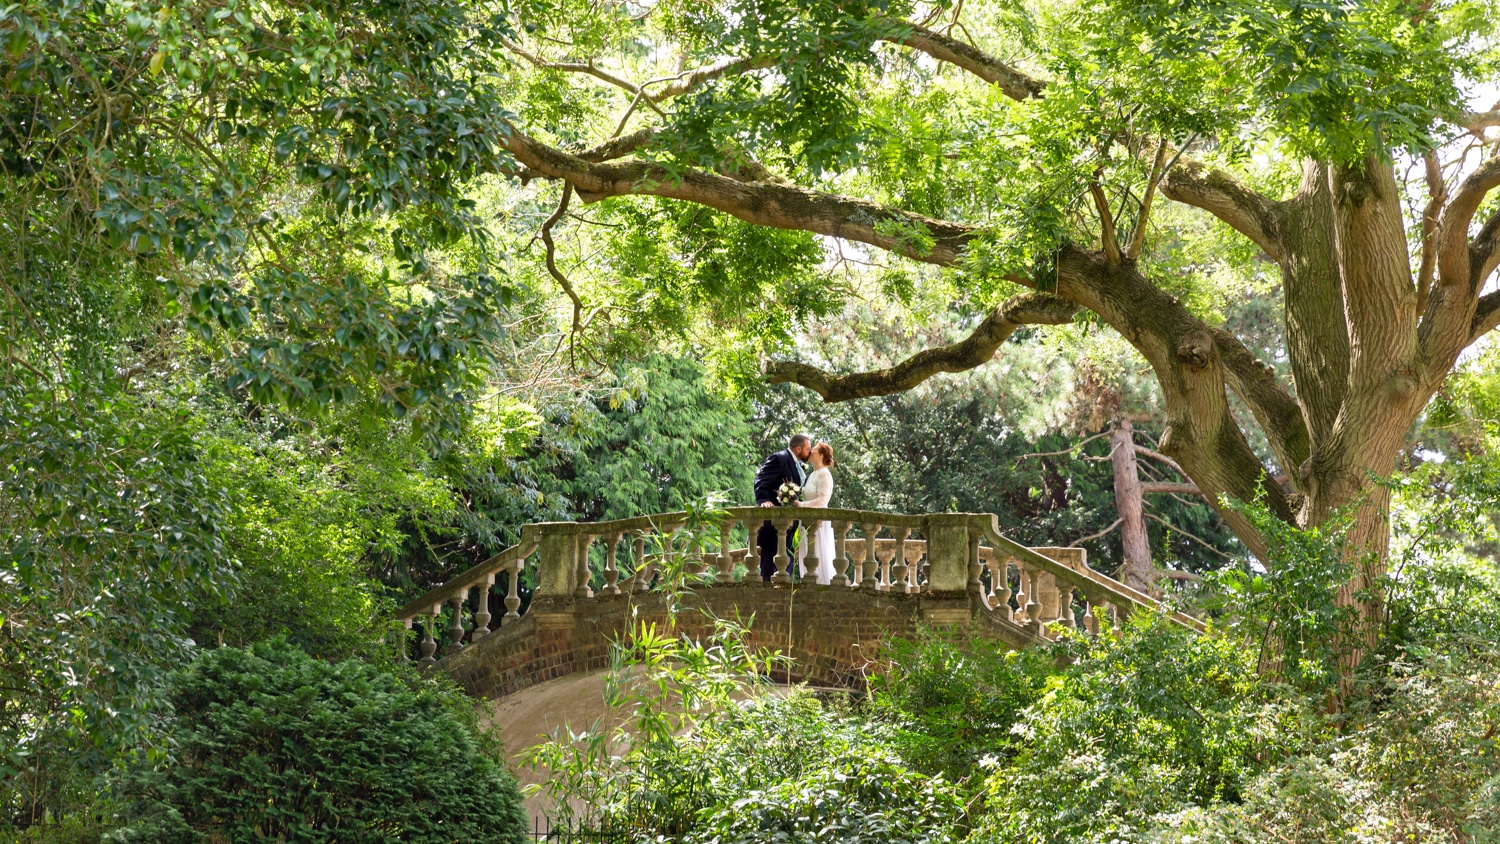 Bride & Groom on a stone bridge surrounded by trees